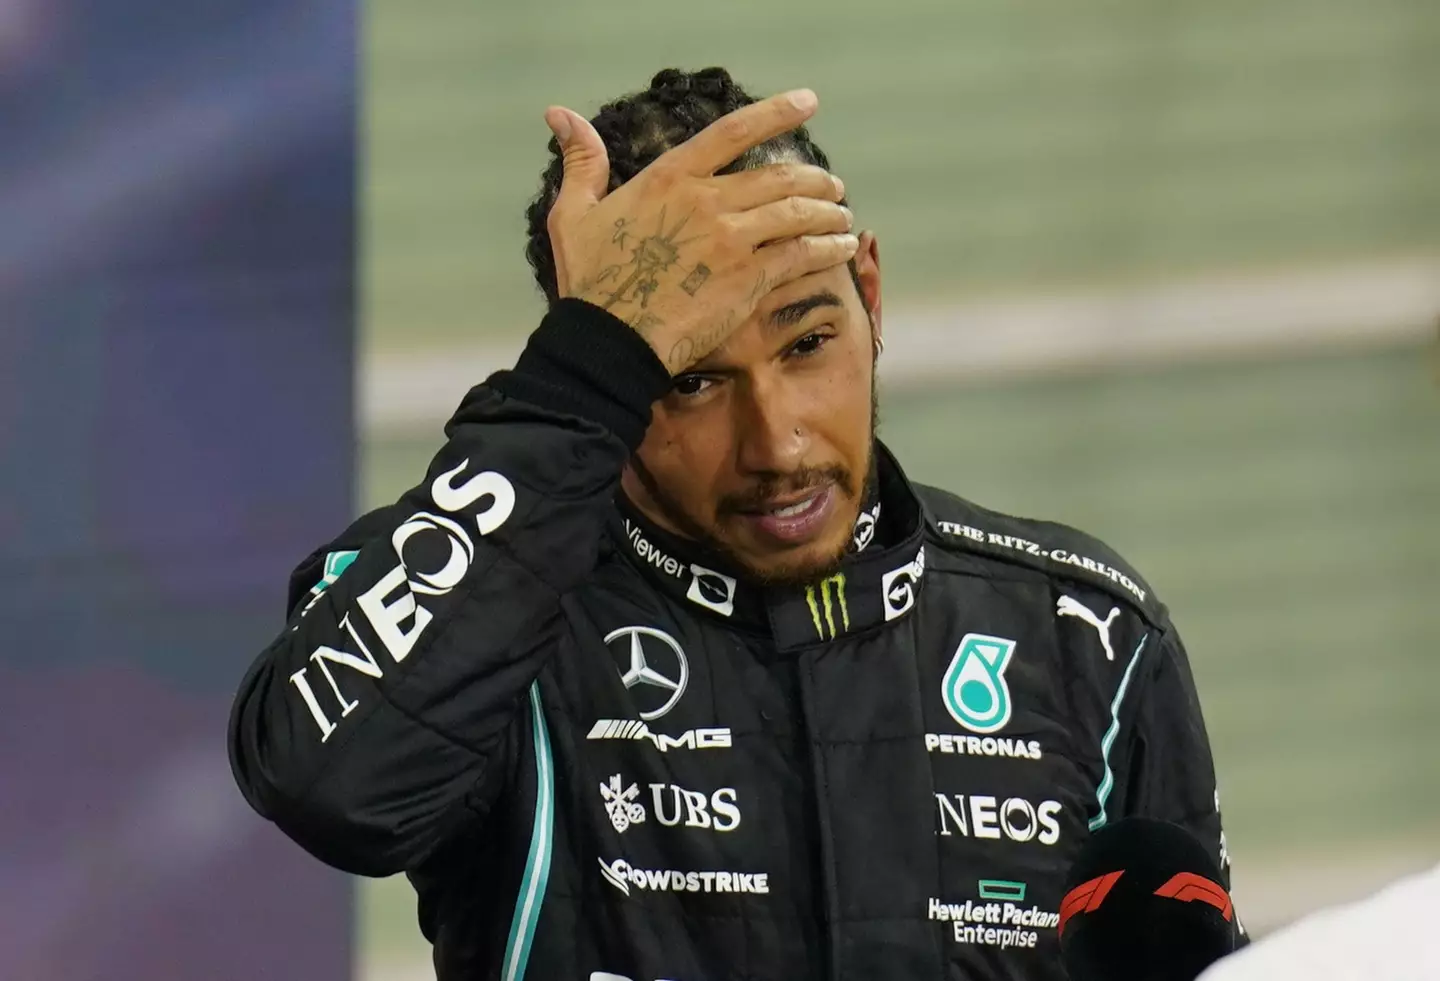 Hamilton missed out on a record breaking eighth title.